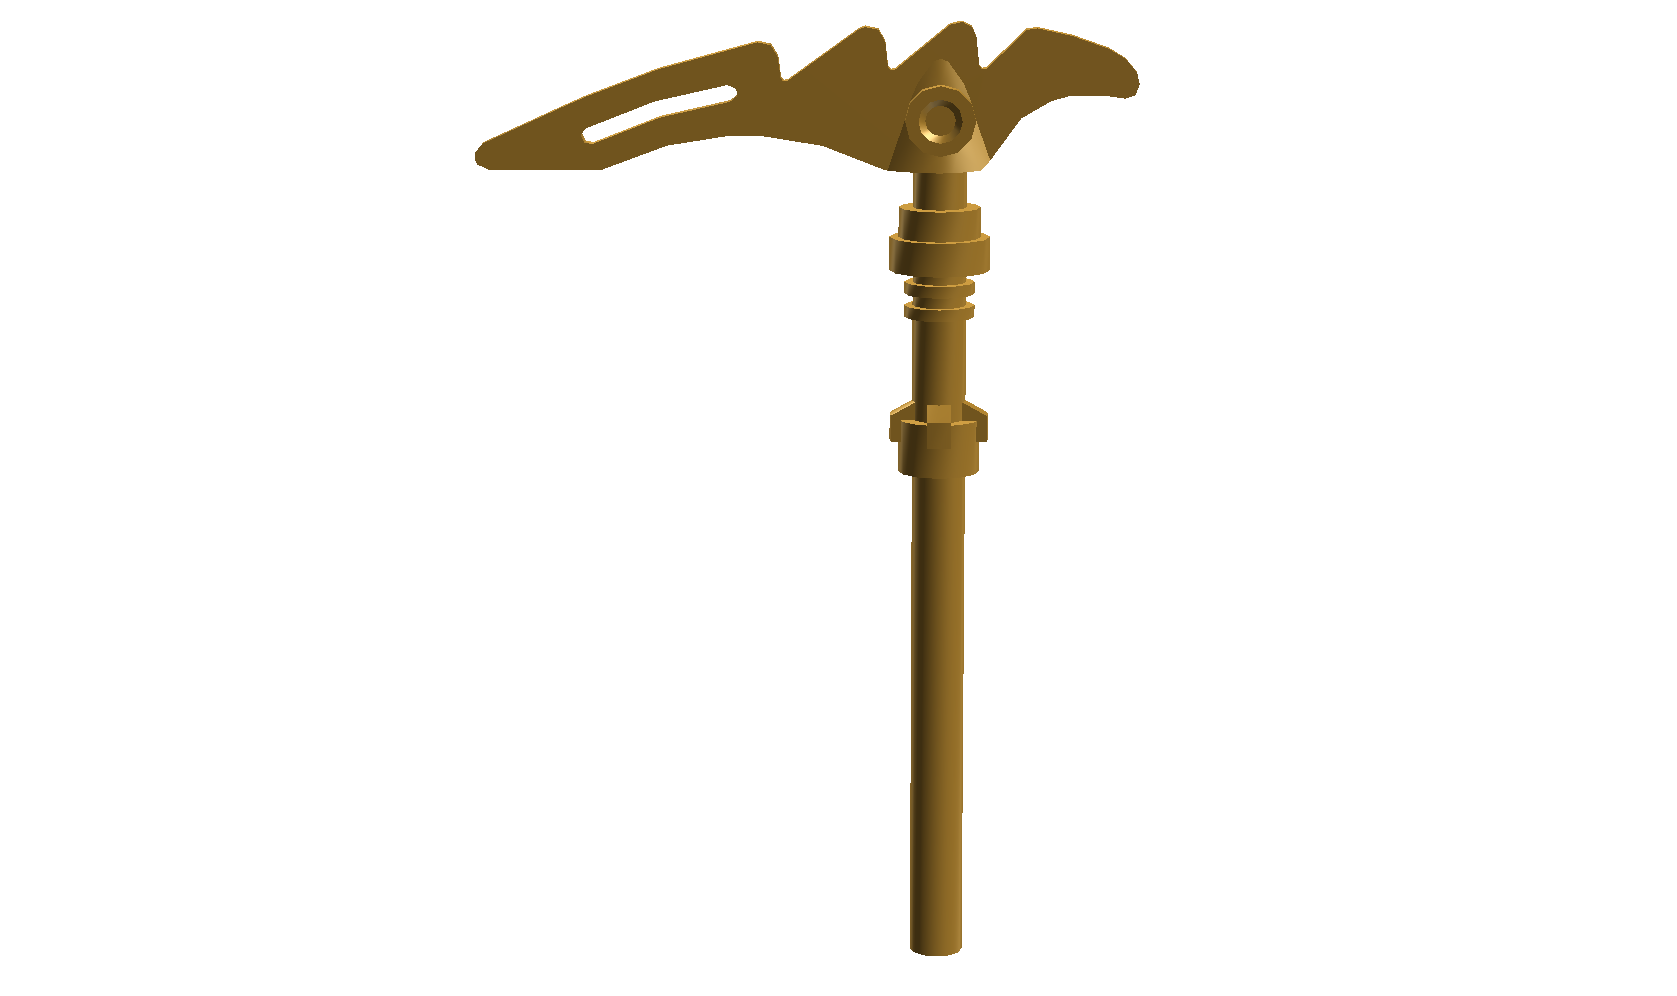 The Four Golden Weapons - Brickipedia, the LEGO Wiki